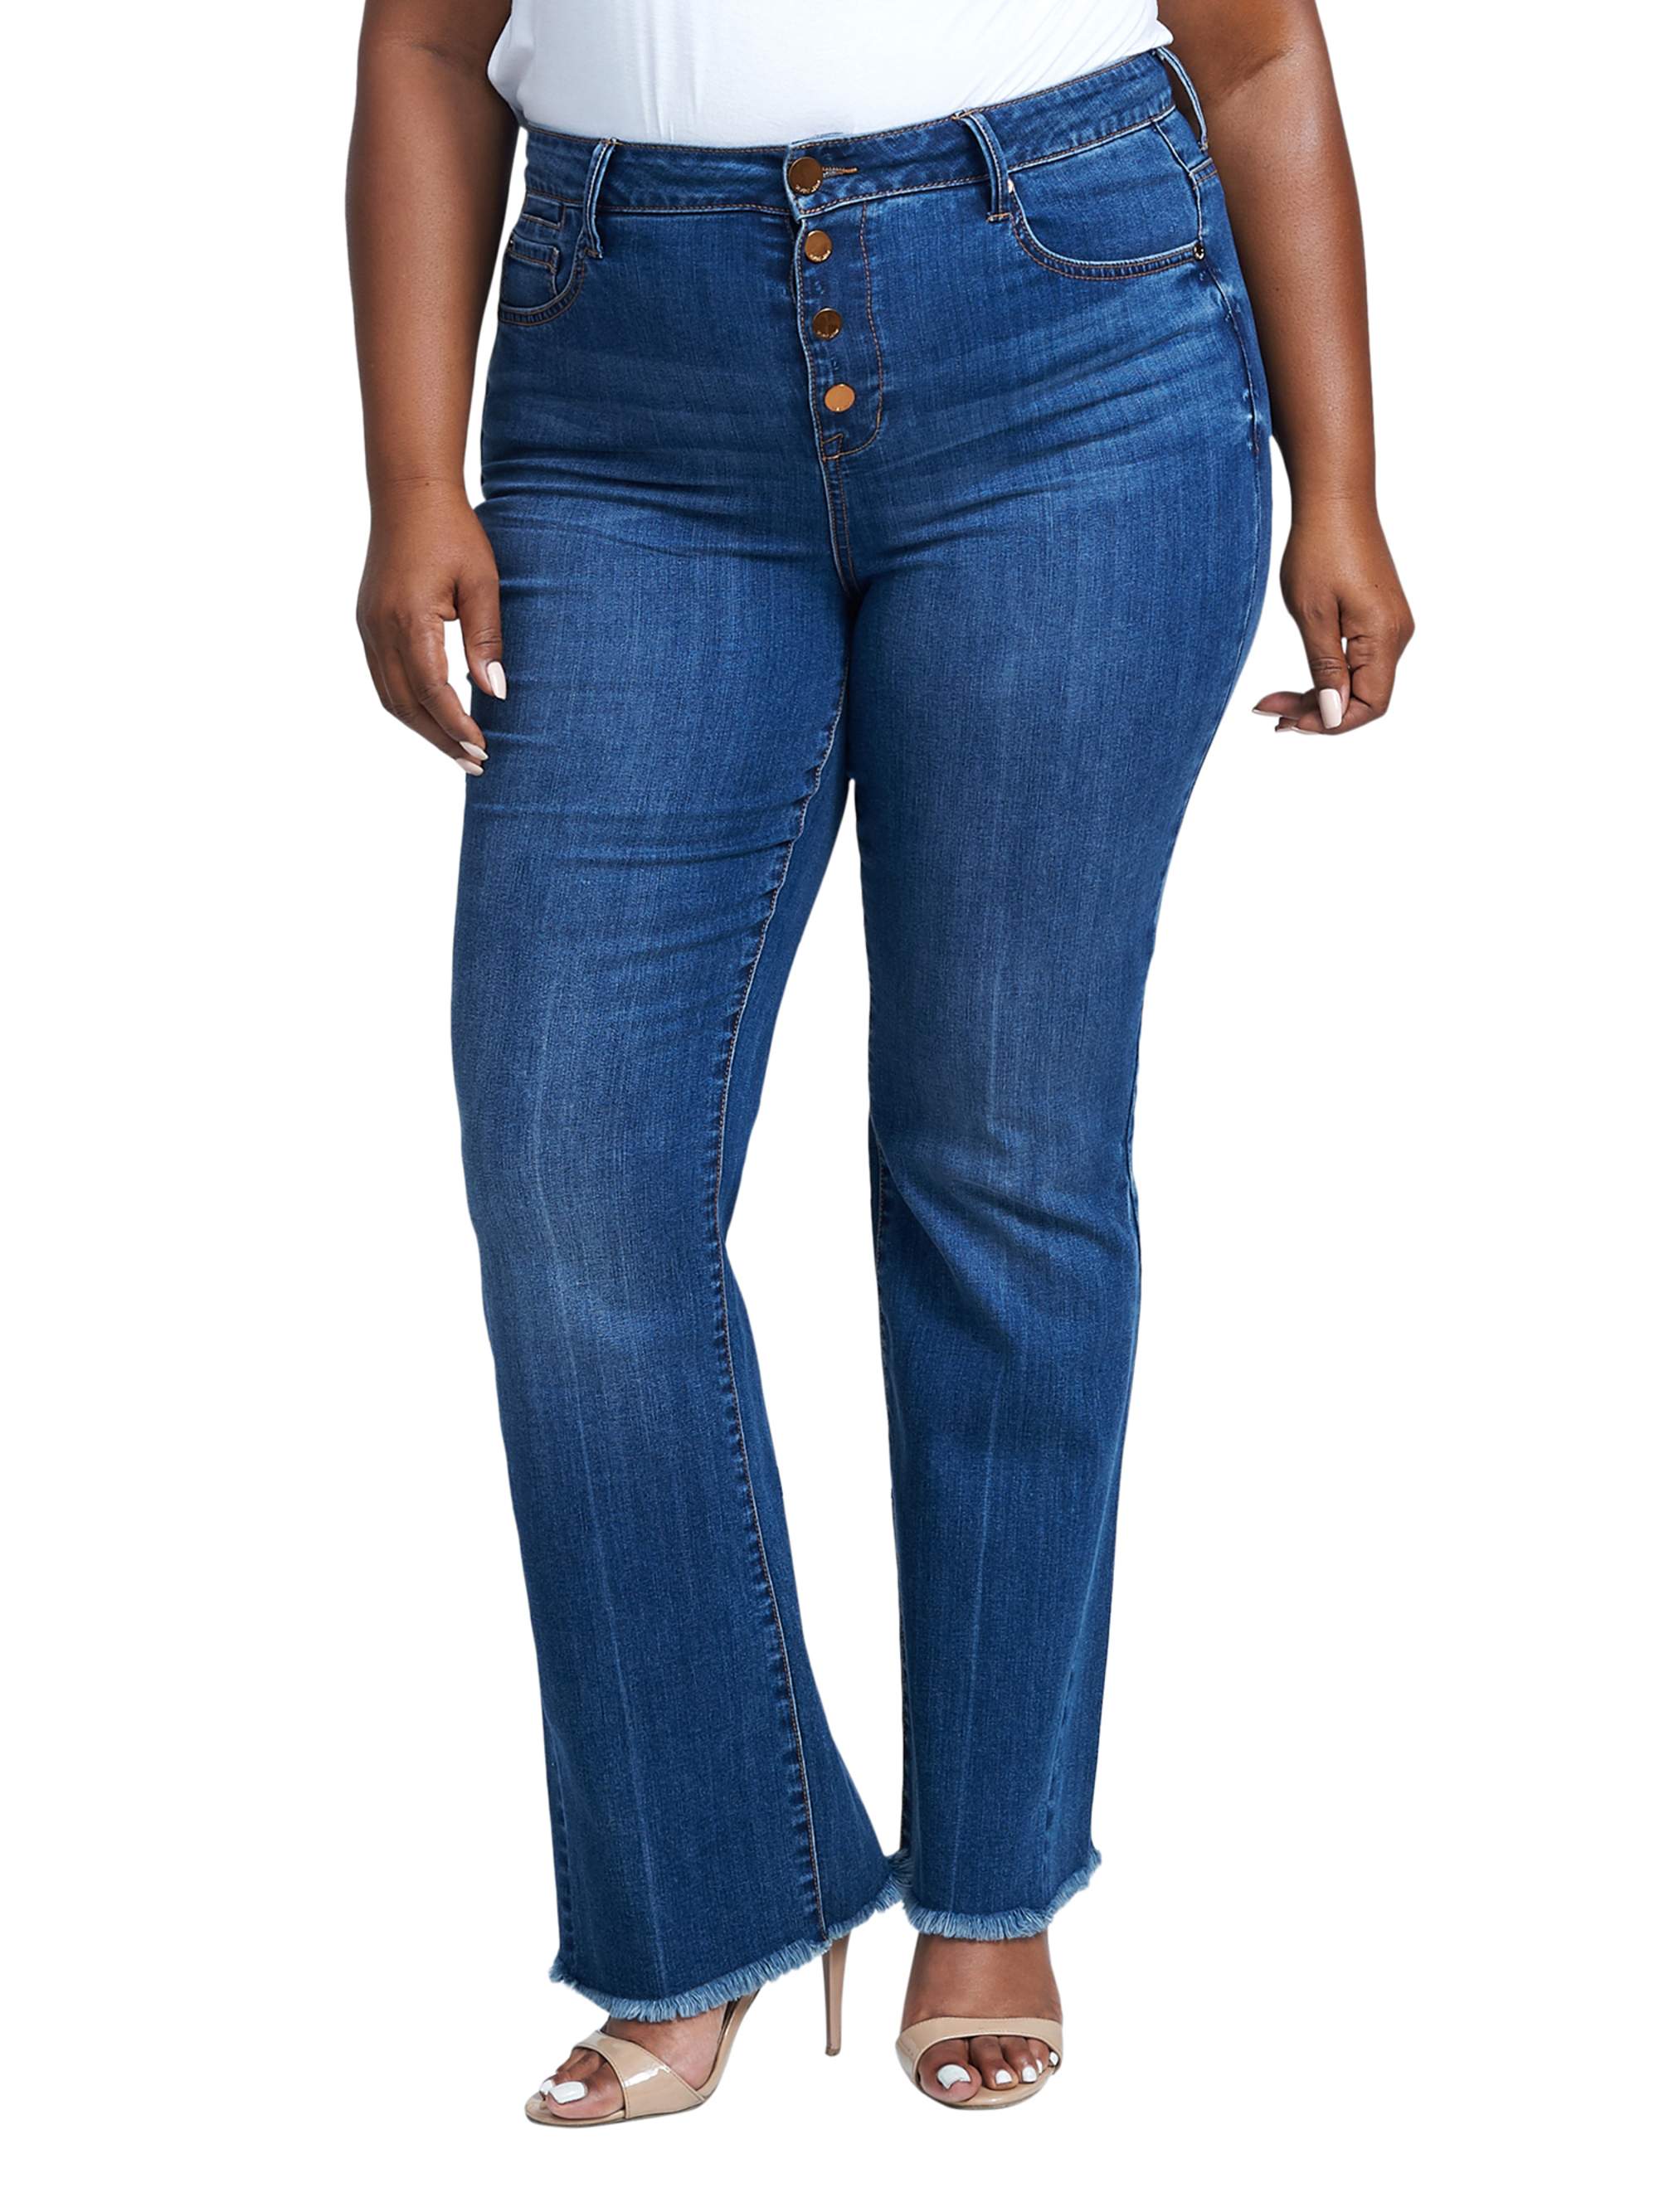 The Curvy Girl's Guide To Fall Denim